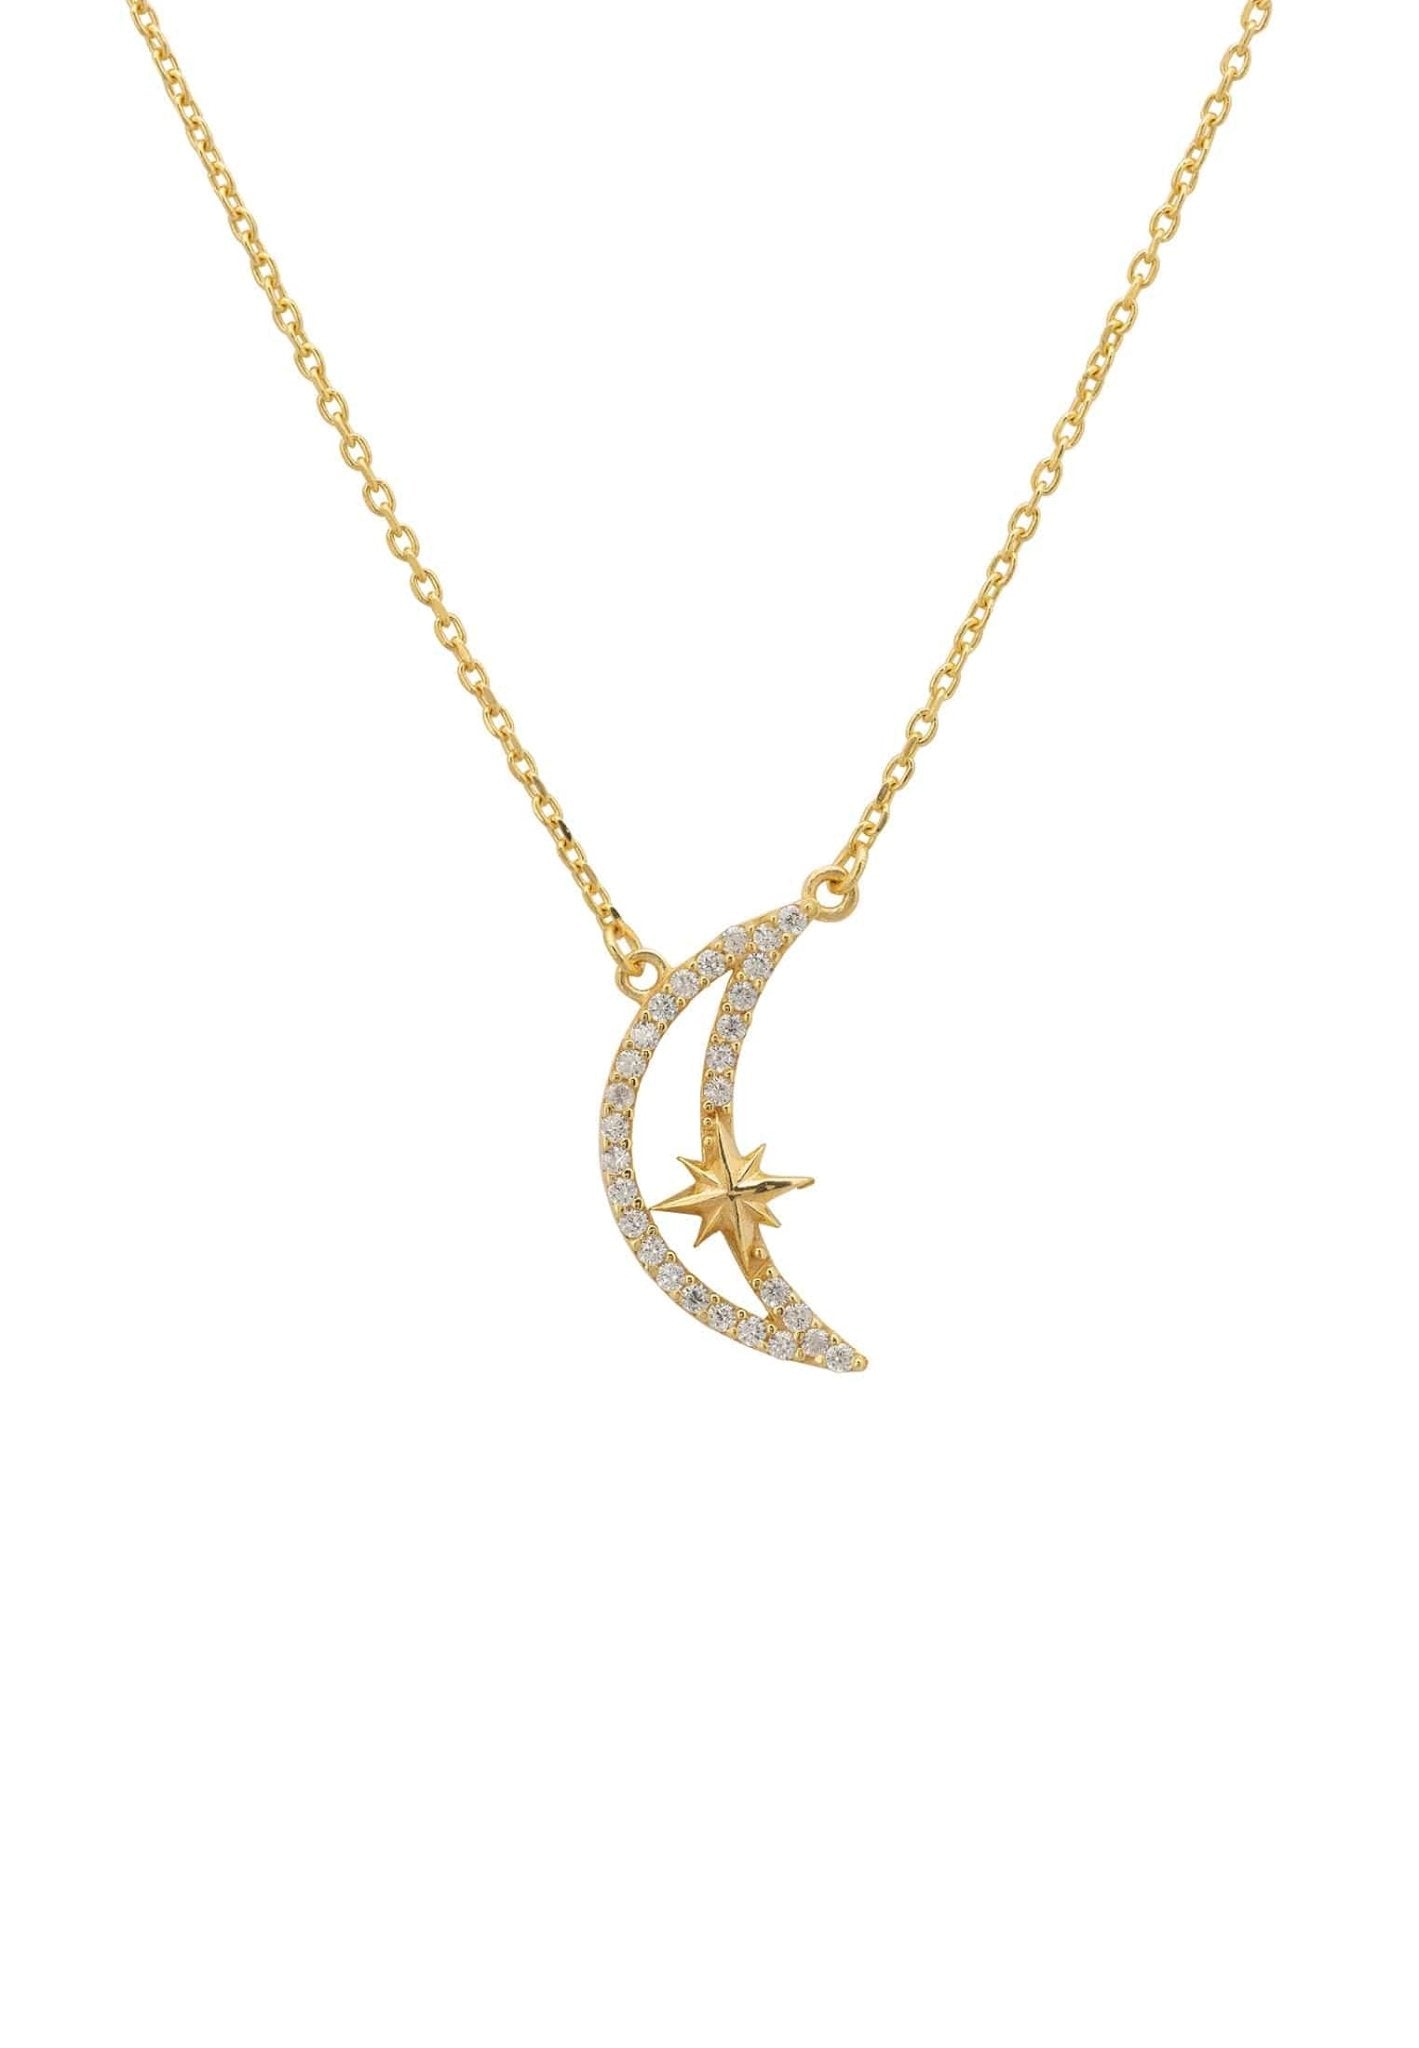 Sparkling Crescent Moon And Star Necklace Gold - Allure SocietyNecklaces